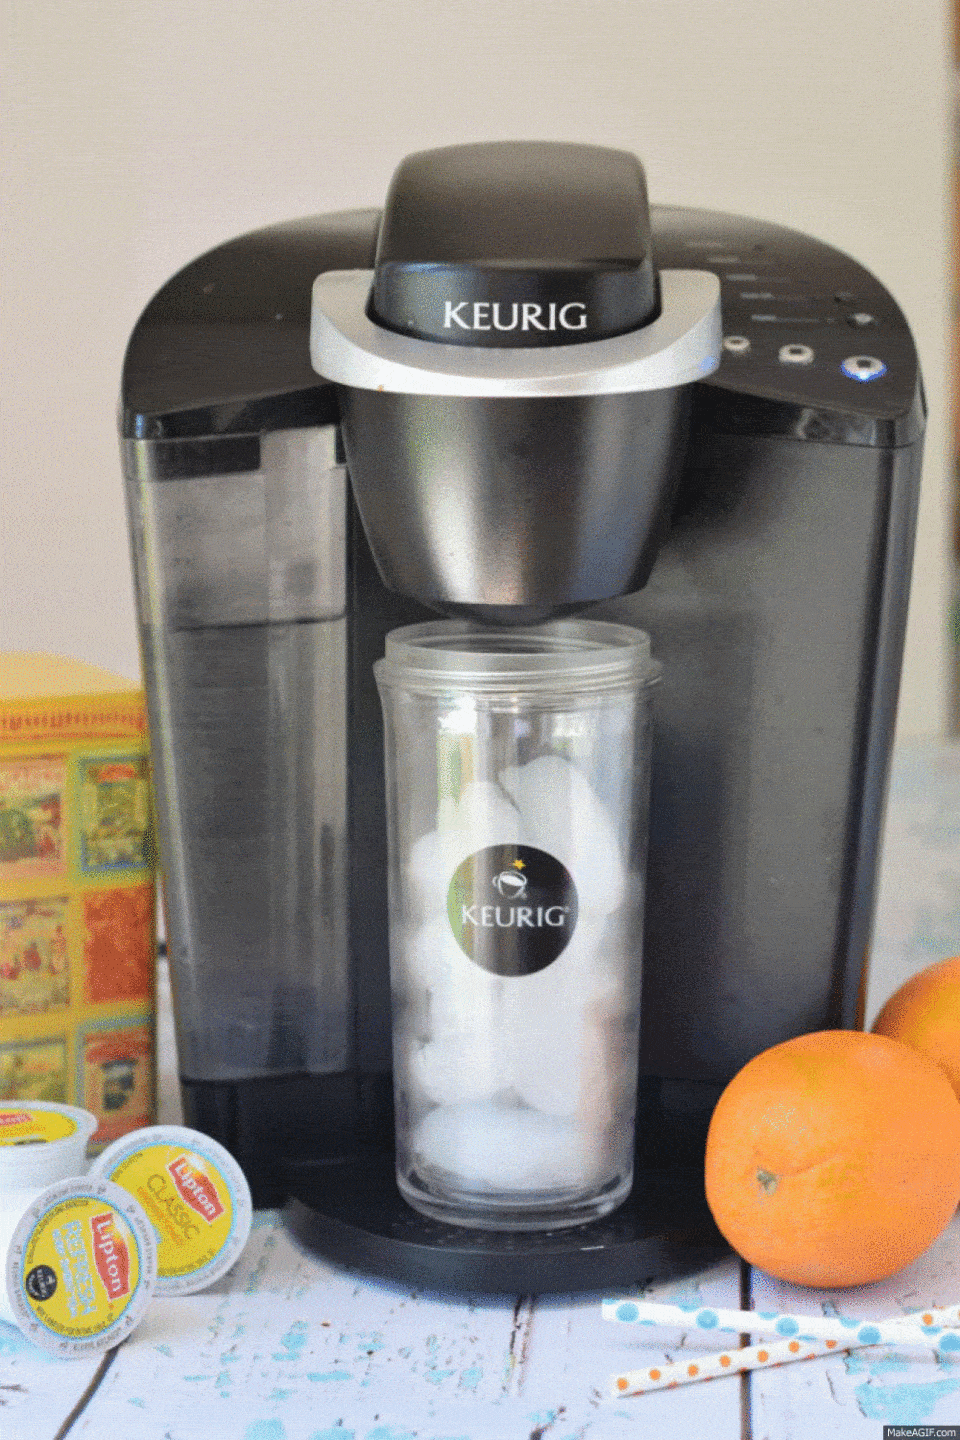 Lipton Tea K-Cups make it easy to have iced tea in minutes!